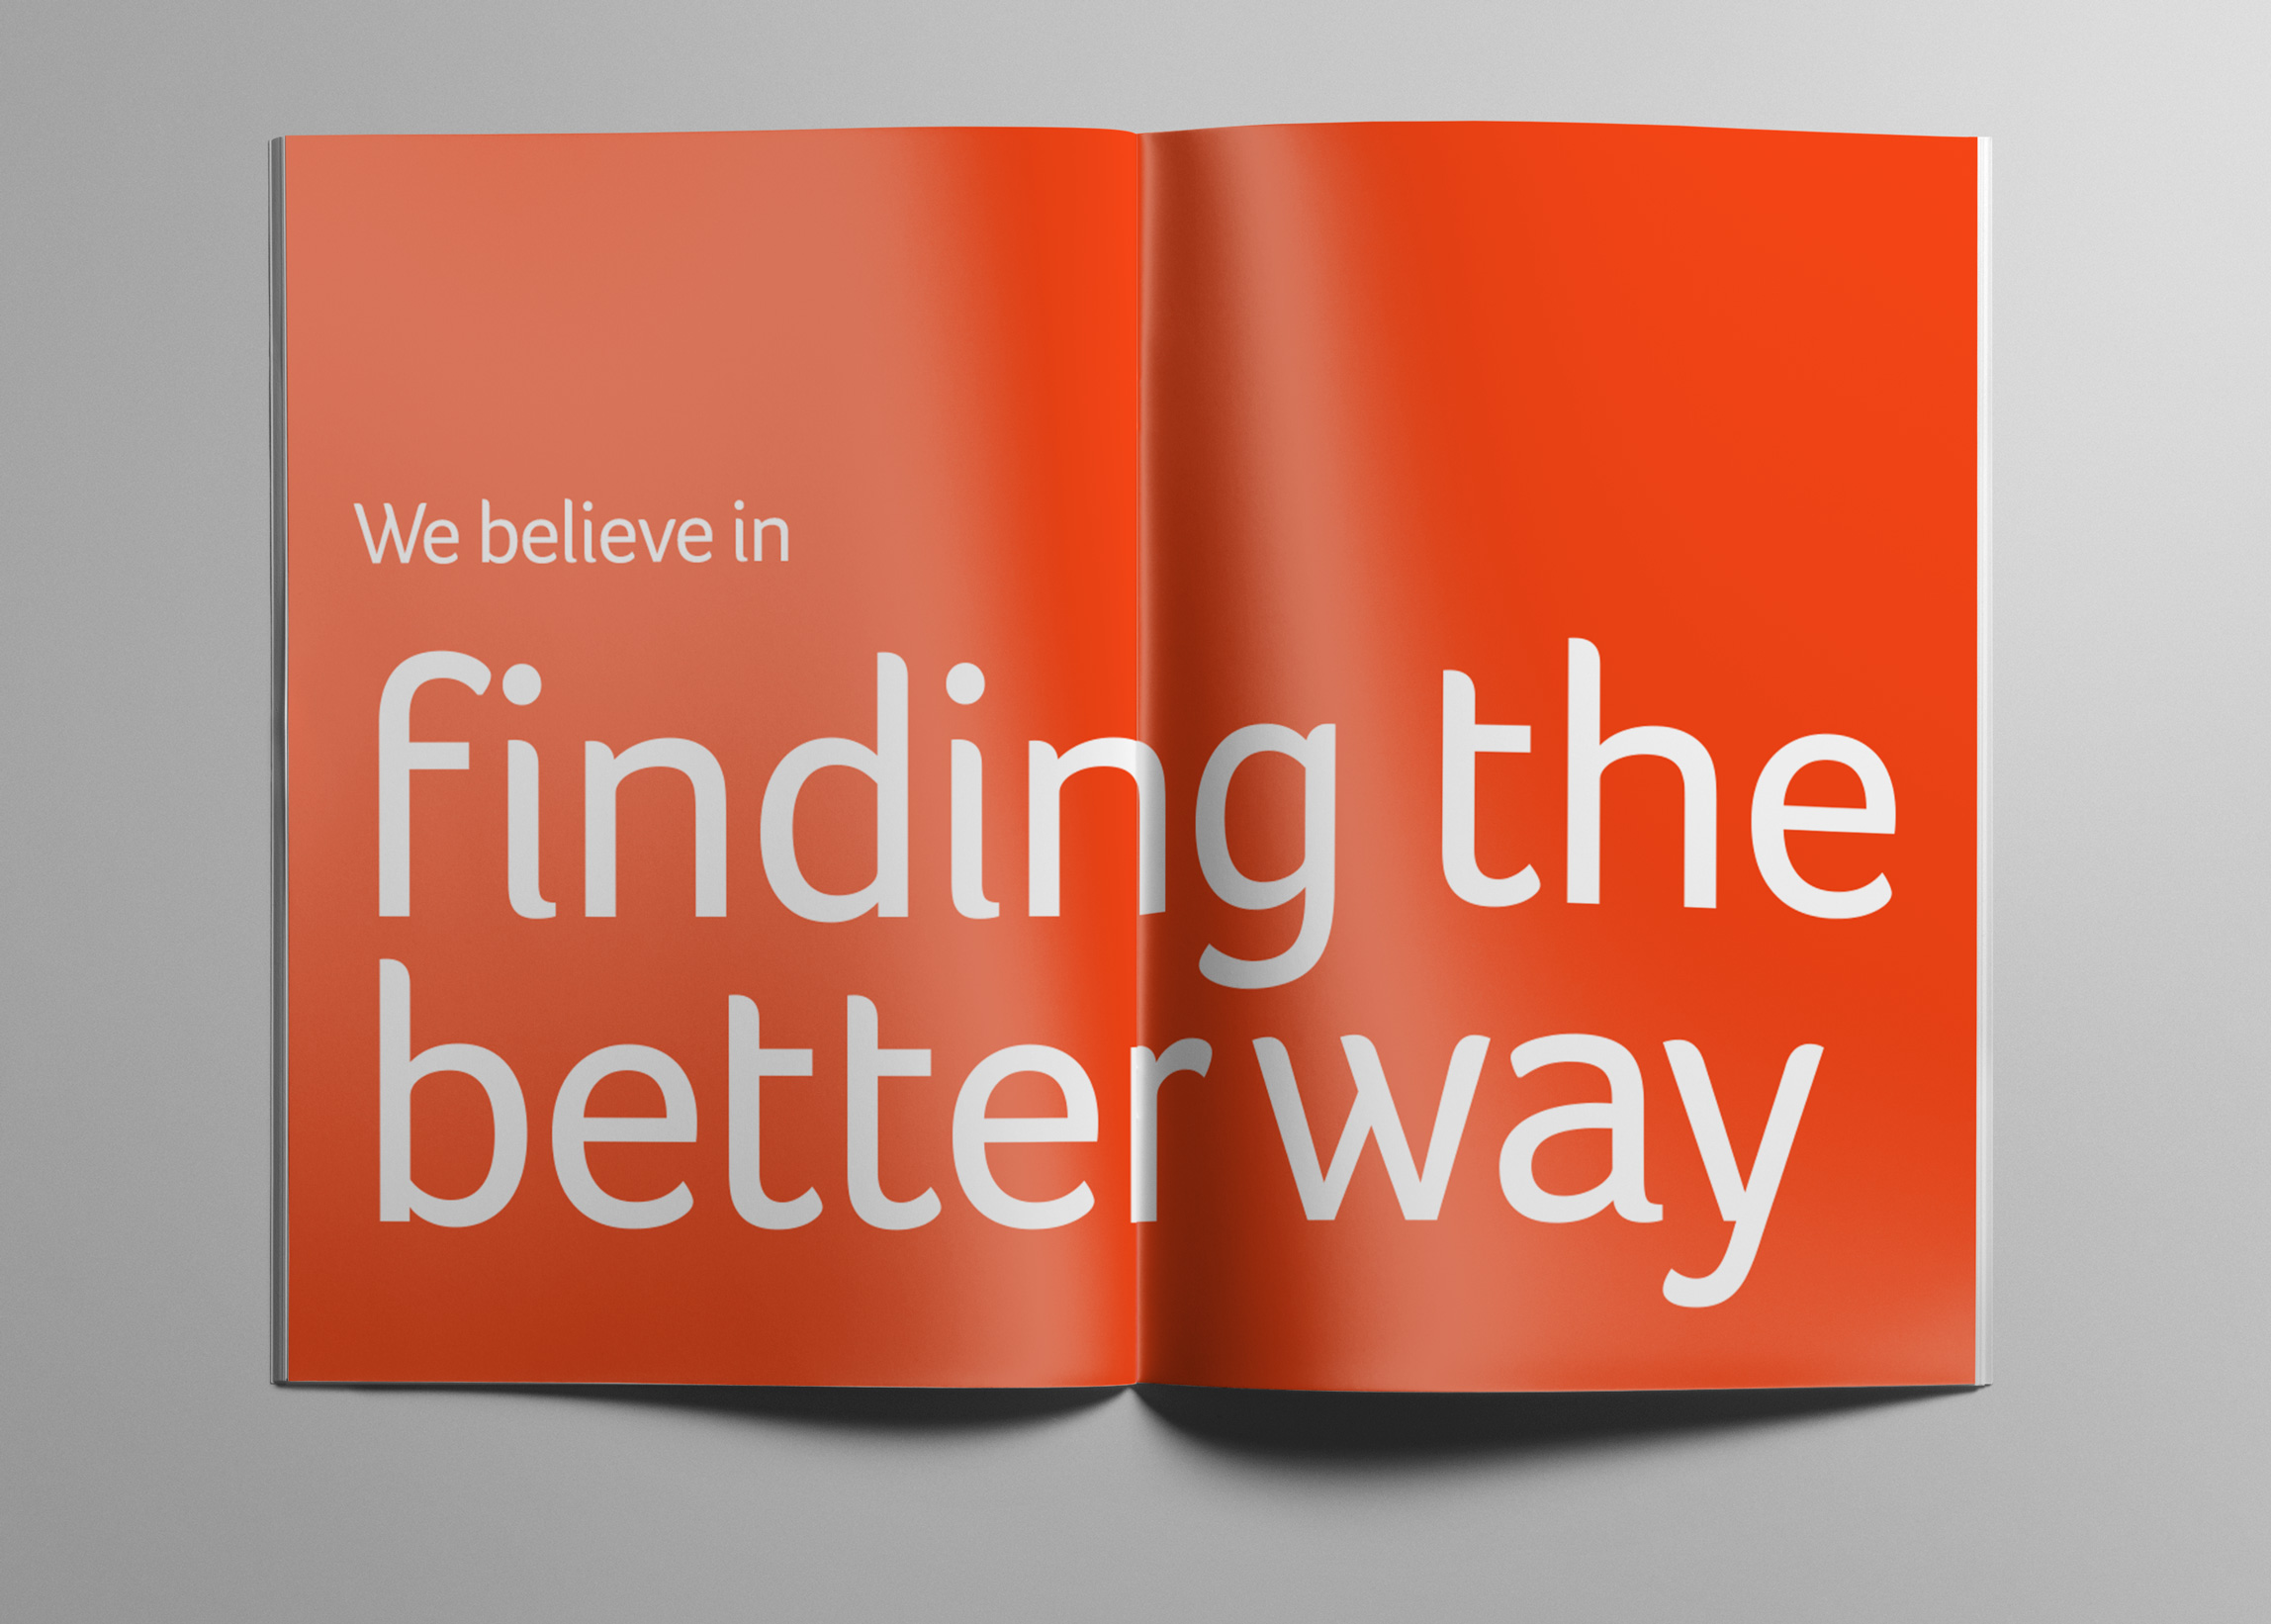 McBains Cooper rebrand finding the better way